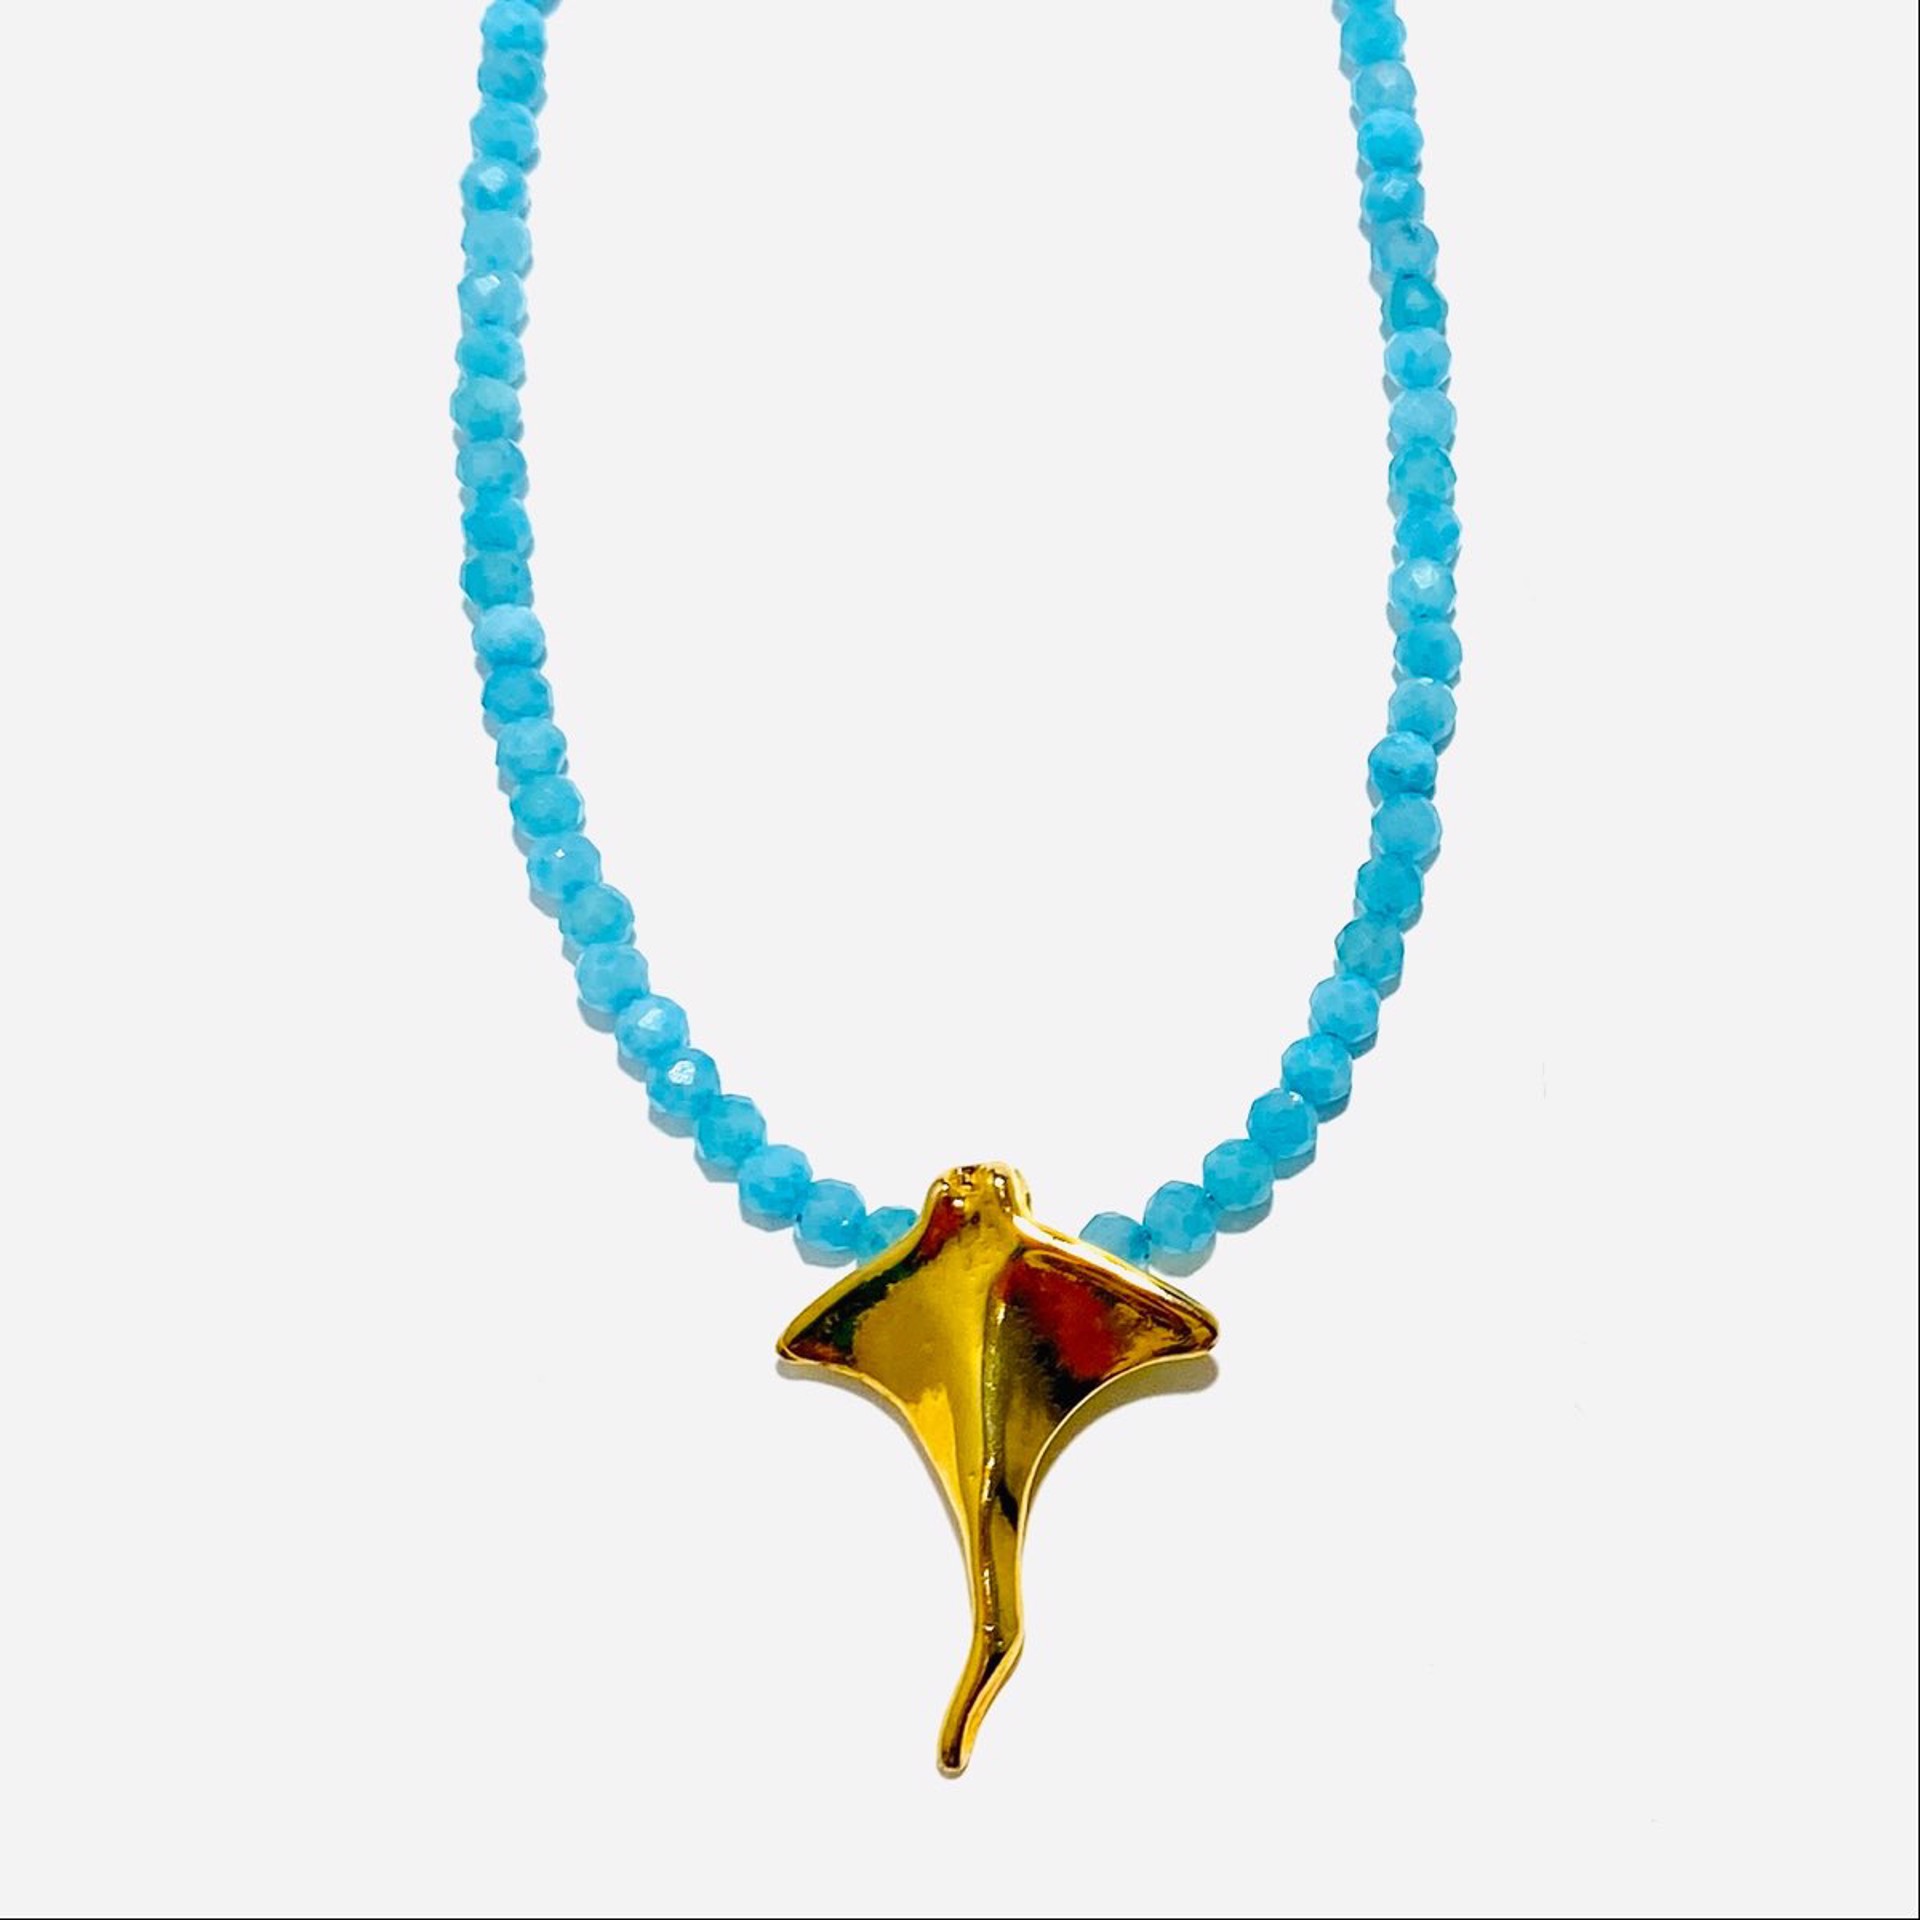 Faceted Tiny Amazonite Vermeil Skate Pendant Necklace by Nance Trueworthy